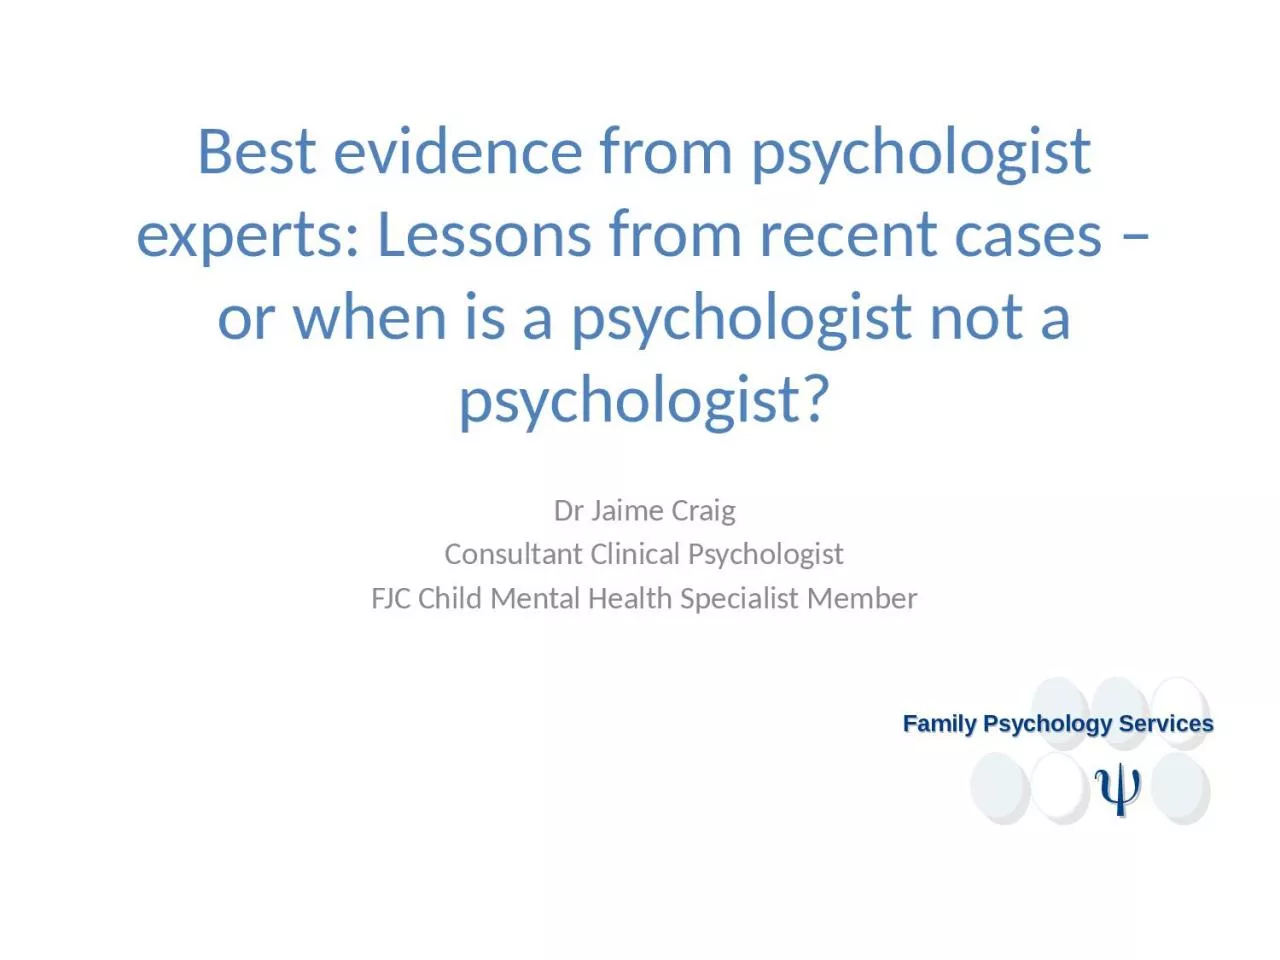 Best evidence from psychologist experts: Lessons from recent cases – or when is a psychologist